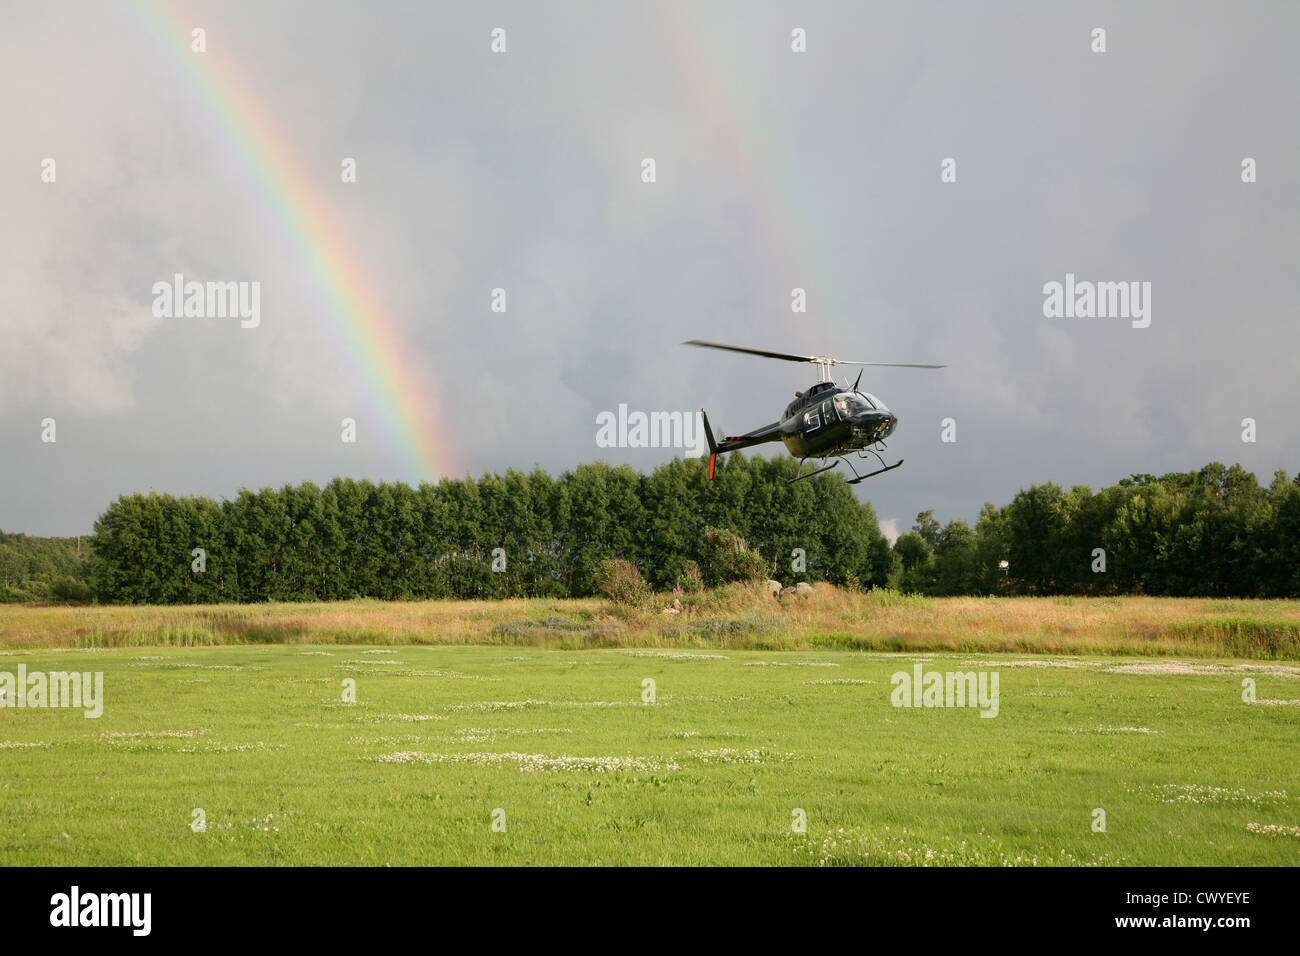 Landing Helicopter Stock Photo